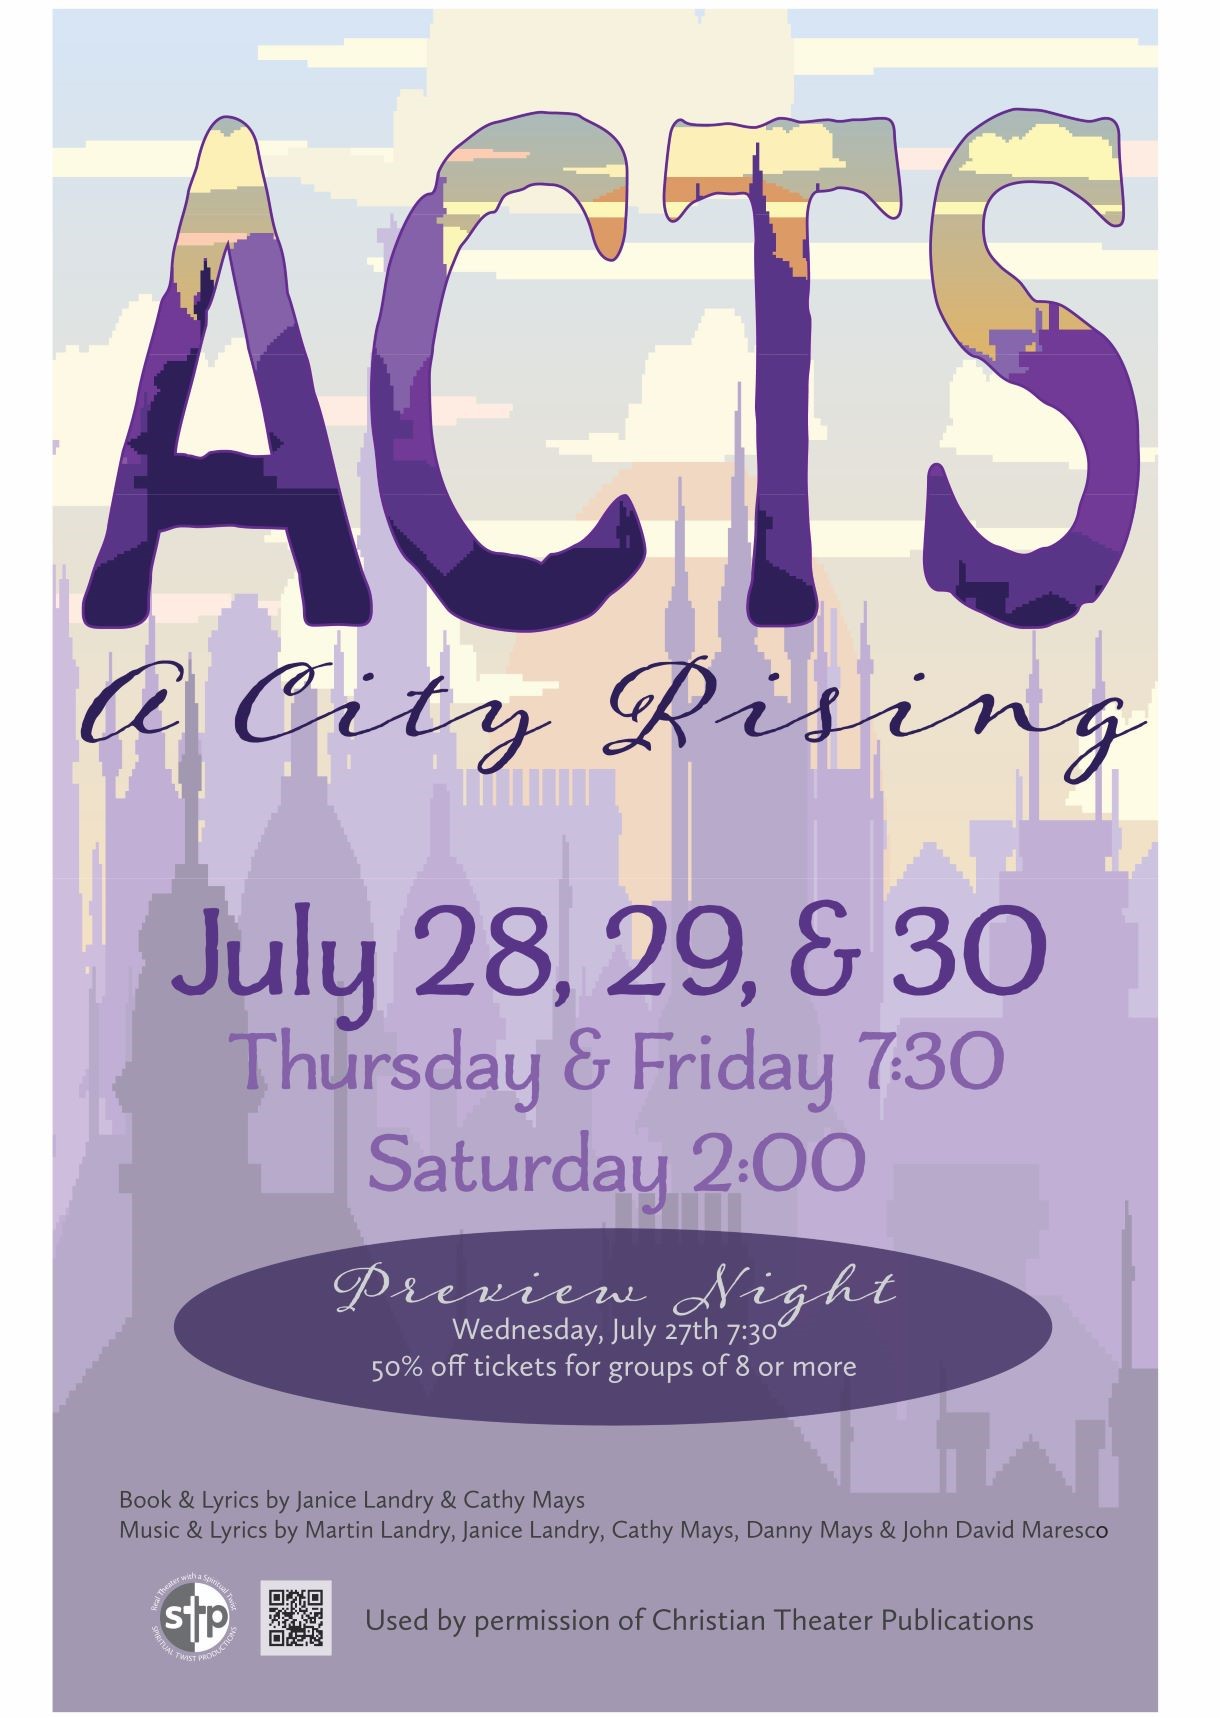 Acts, A City Rising Saturday, July 30, 2022 @ 2:00 PM on Jul 30, 14:00@Spiritual Twist Productions - Pick a seat, Buy tickets and Get information on Spiritual Twist Productions tickets.spiritualtwist.com